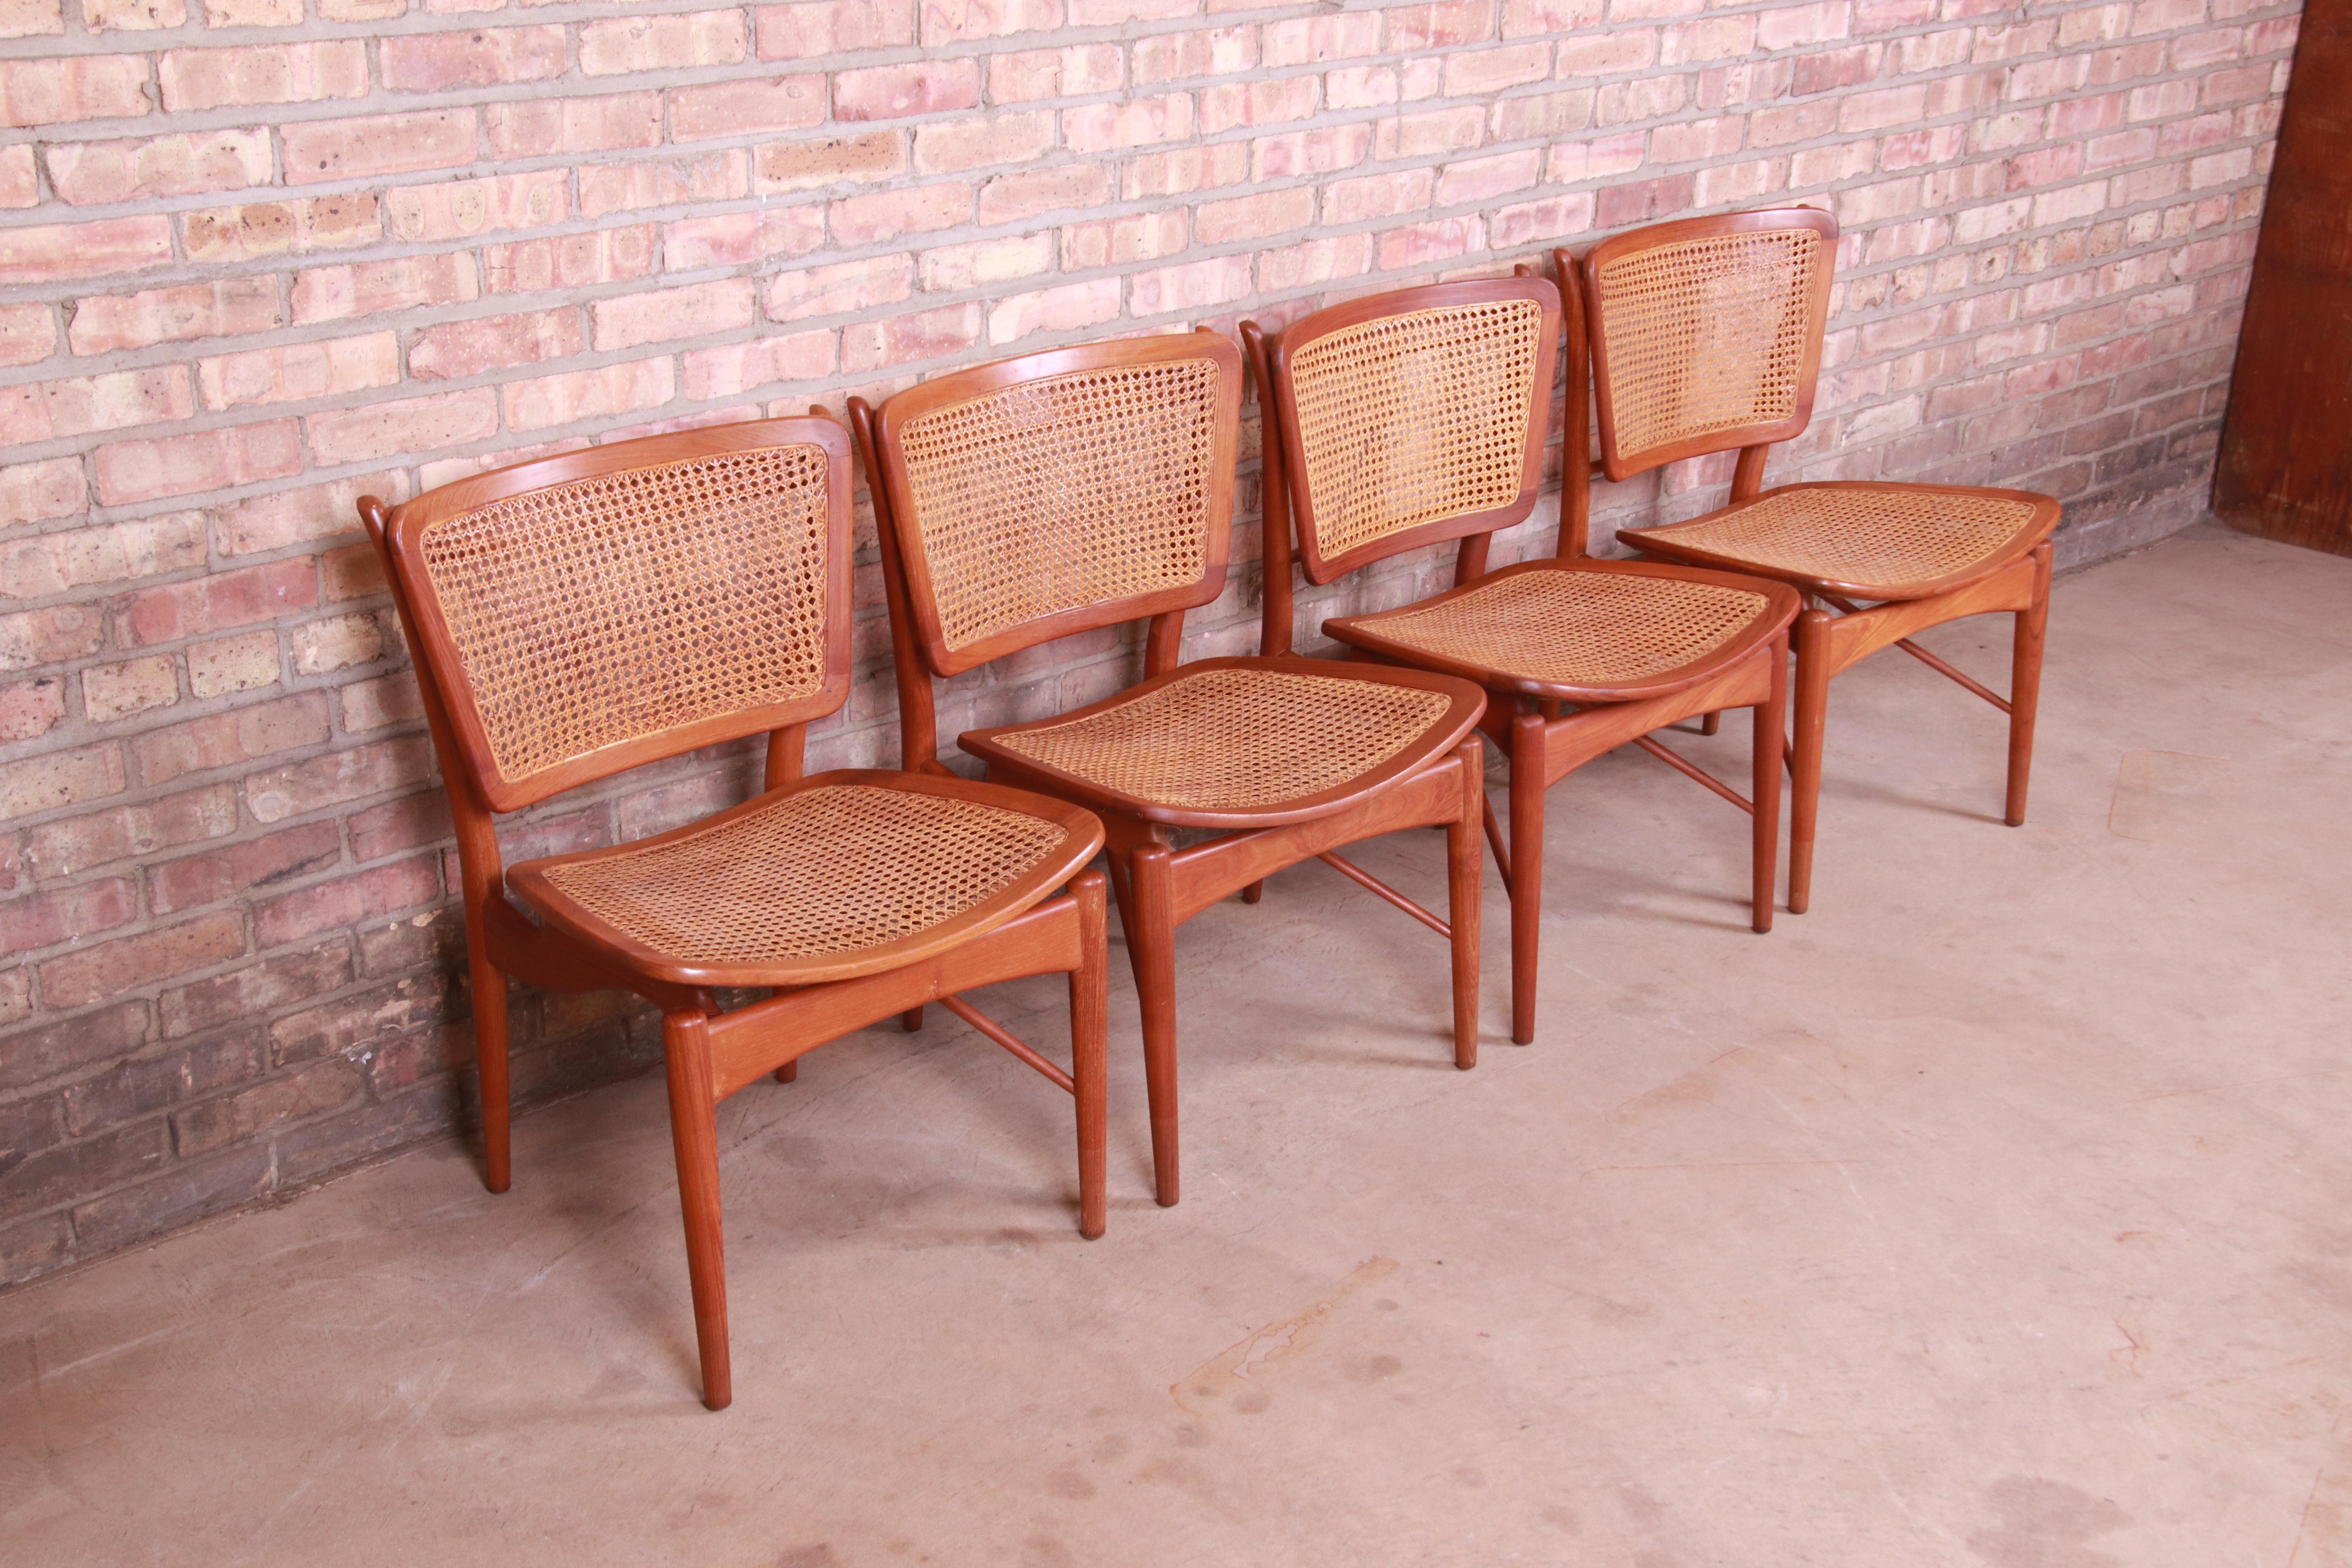 Indian Finn Juhl for Baker Furniture Teak and Cane Dining Chairs, Set of Four